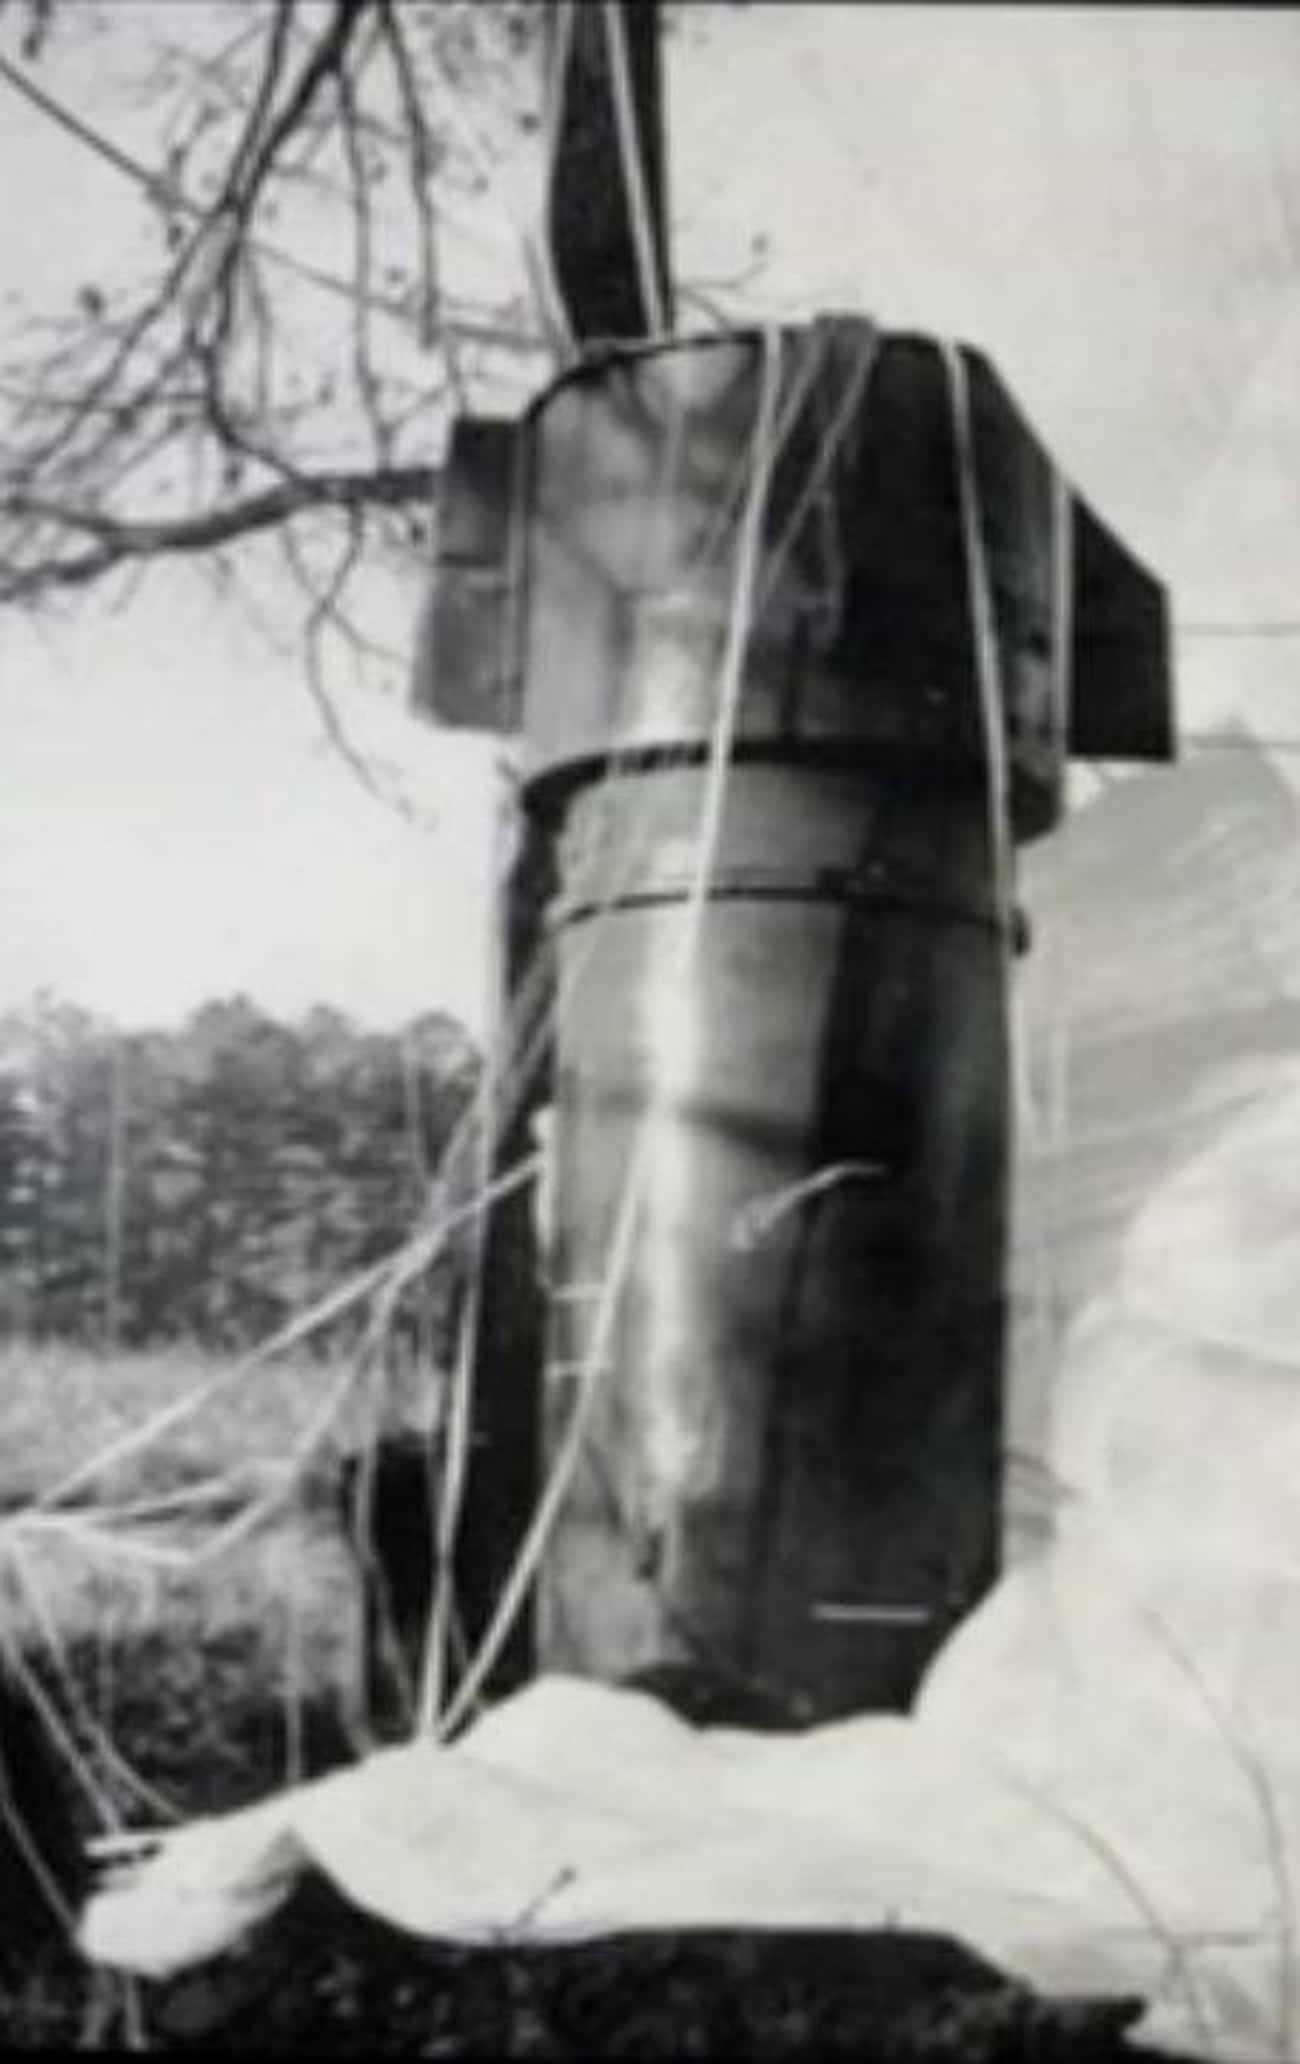 Two Powerful Nuclear Bombs Accidentally Fell On North Carolina